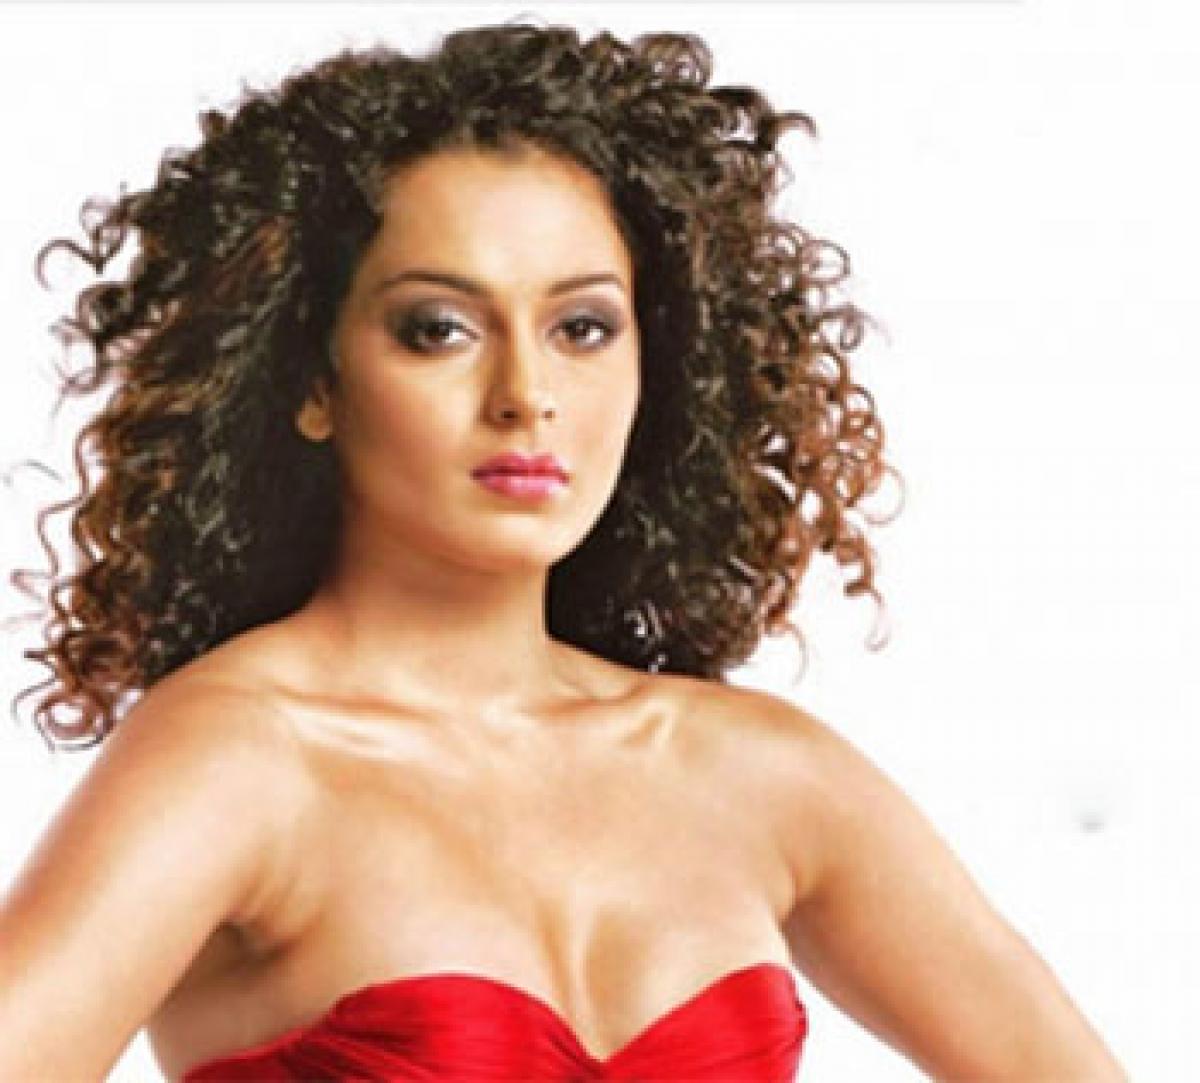 Kangana not approached for Sanjay Dutt biopic